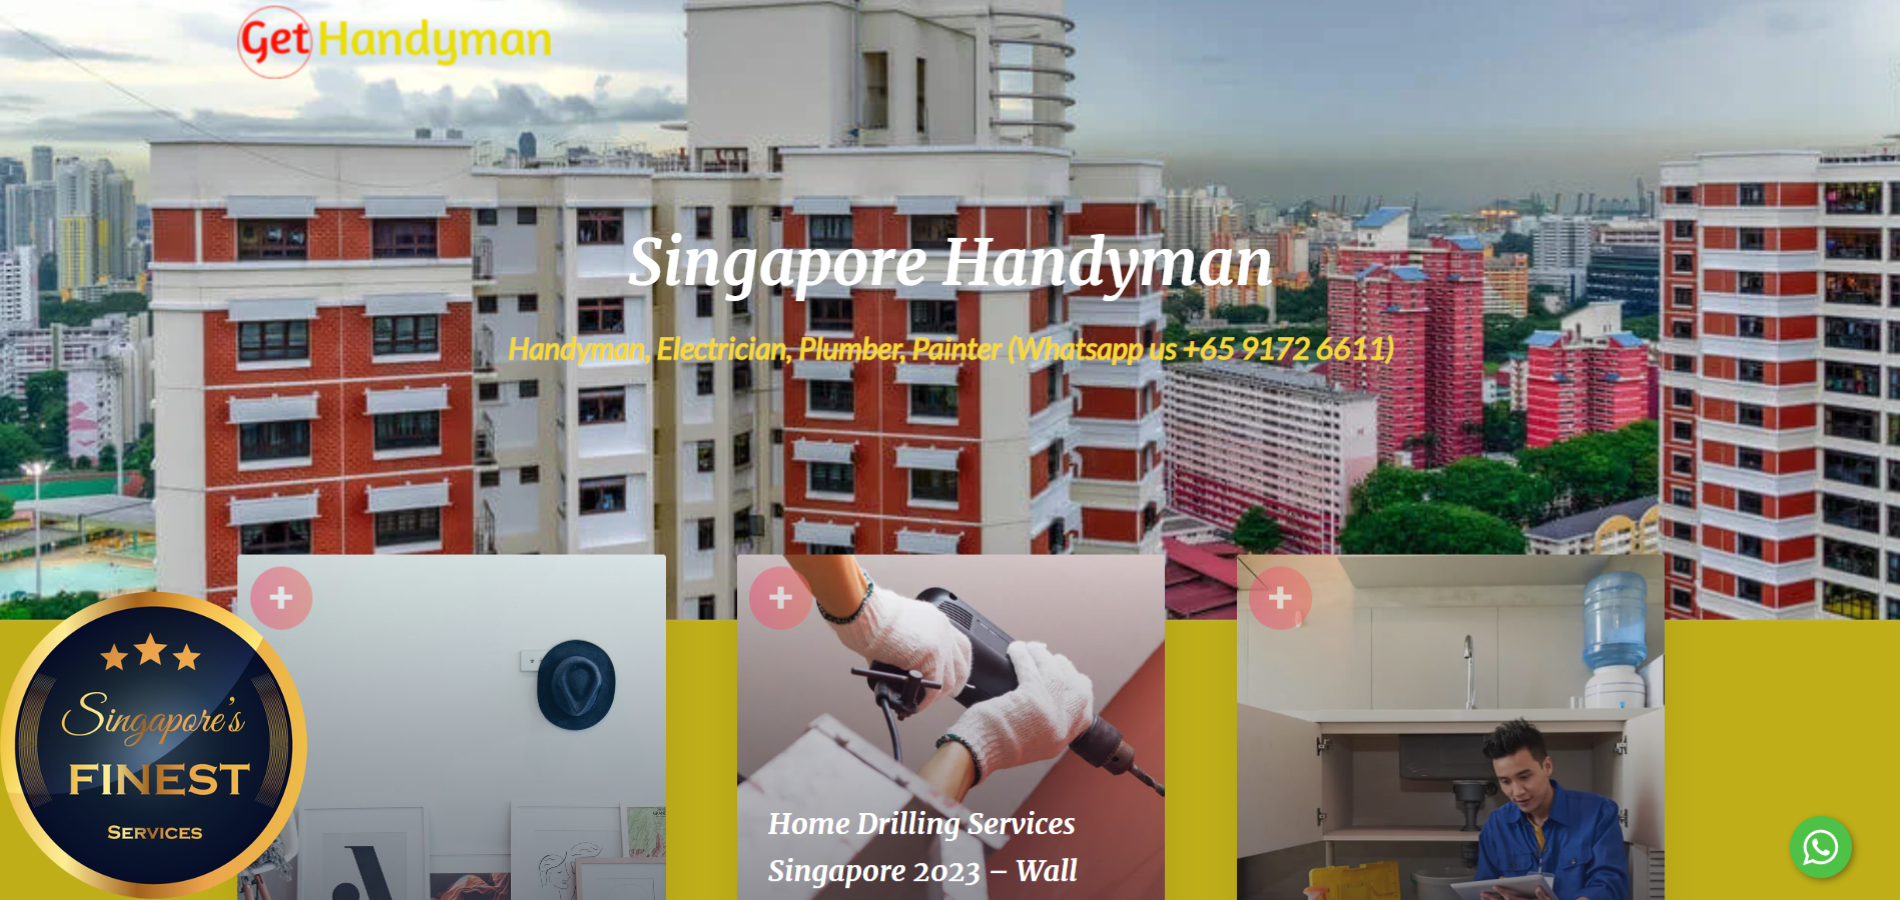 The Finest Handyman Services in Singapore